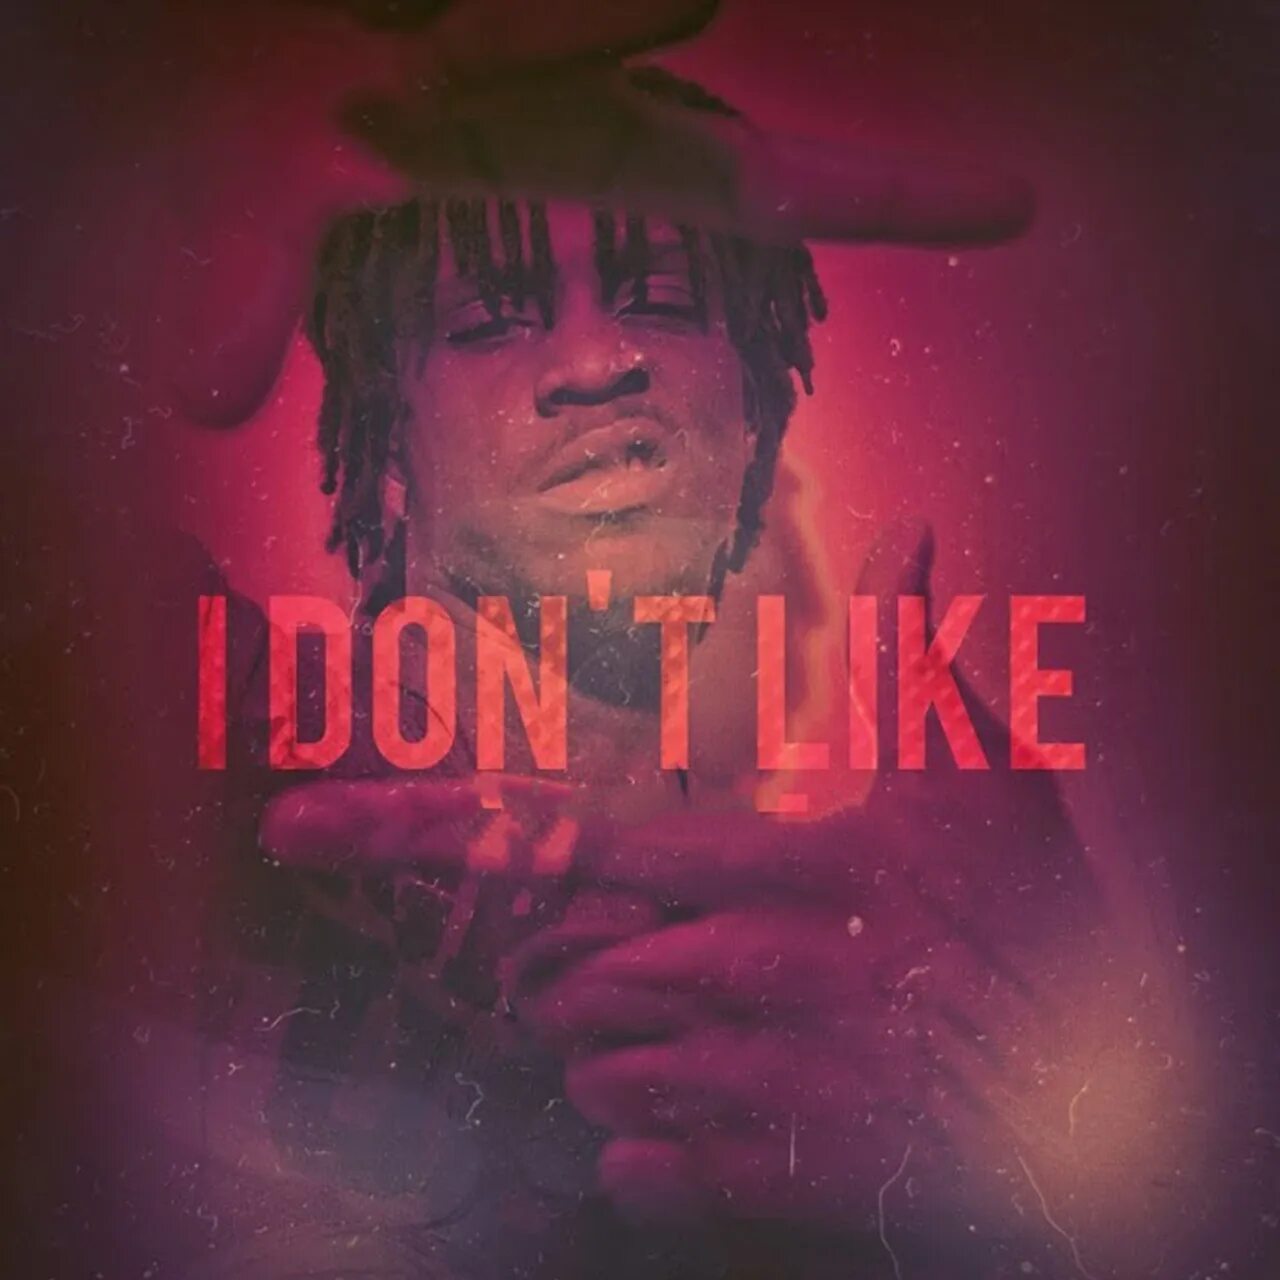 Dont feat. Chief Keef. Lil Reese Chief Keef. Chief Keef обои. Чиф Киф i don't like.